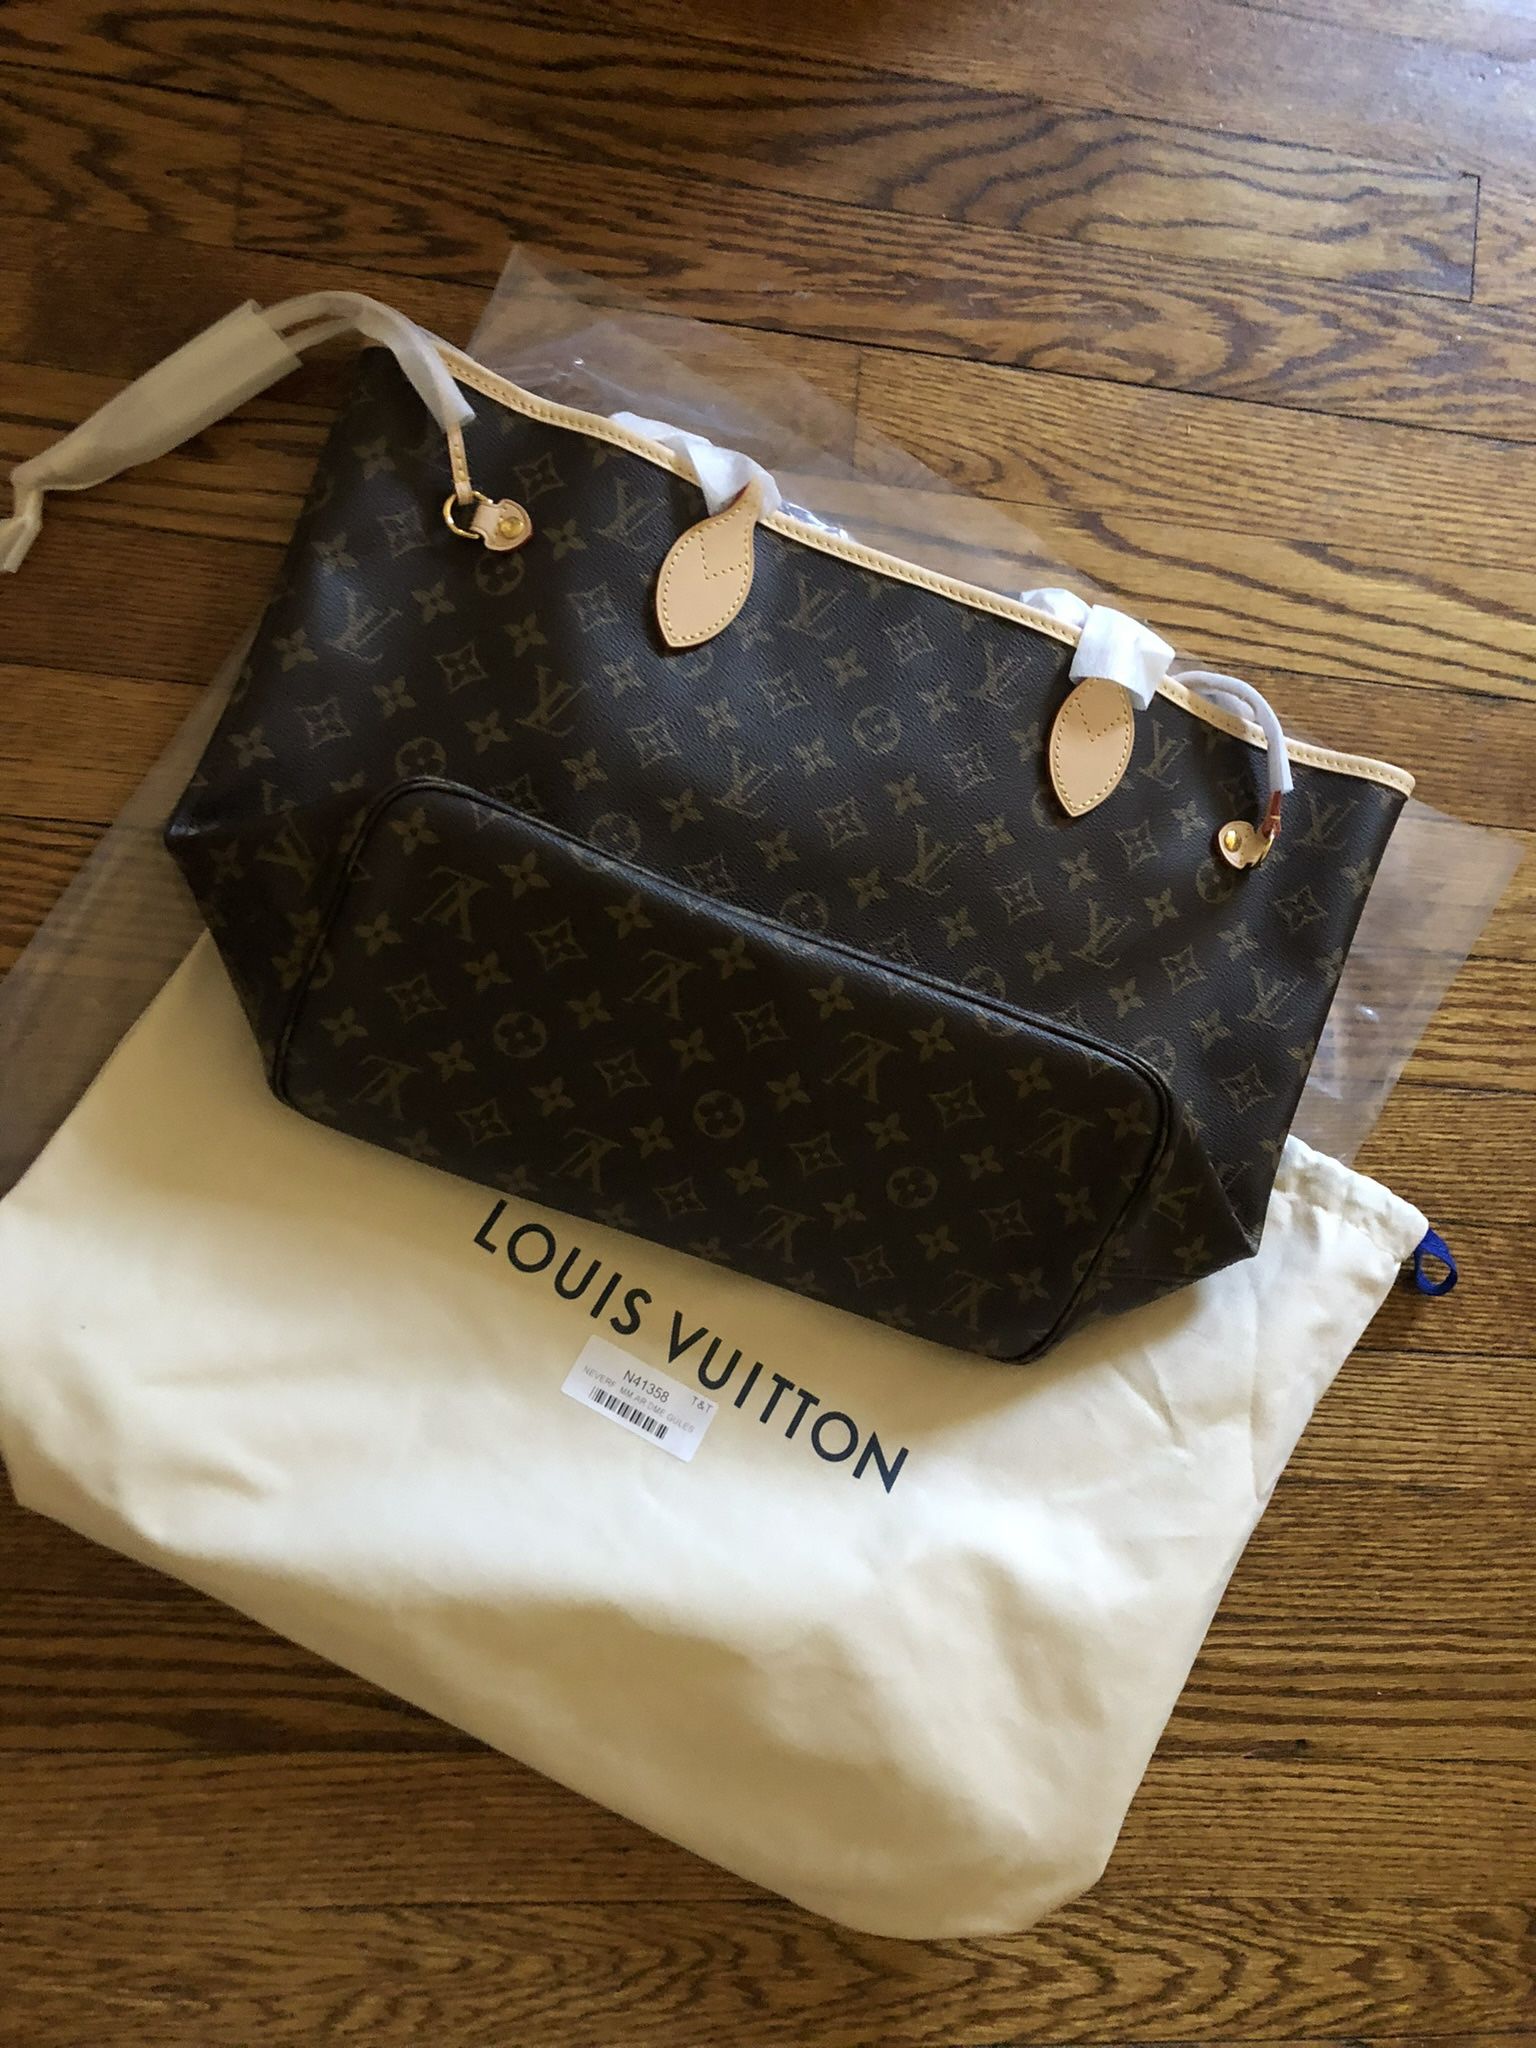 Authentic Louis Vuitton Handbag for Sale in Euclid, OH - OfferUp